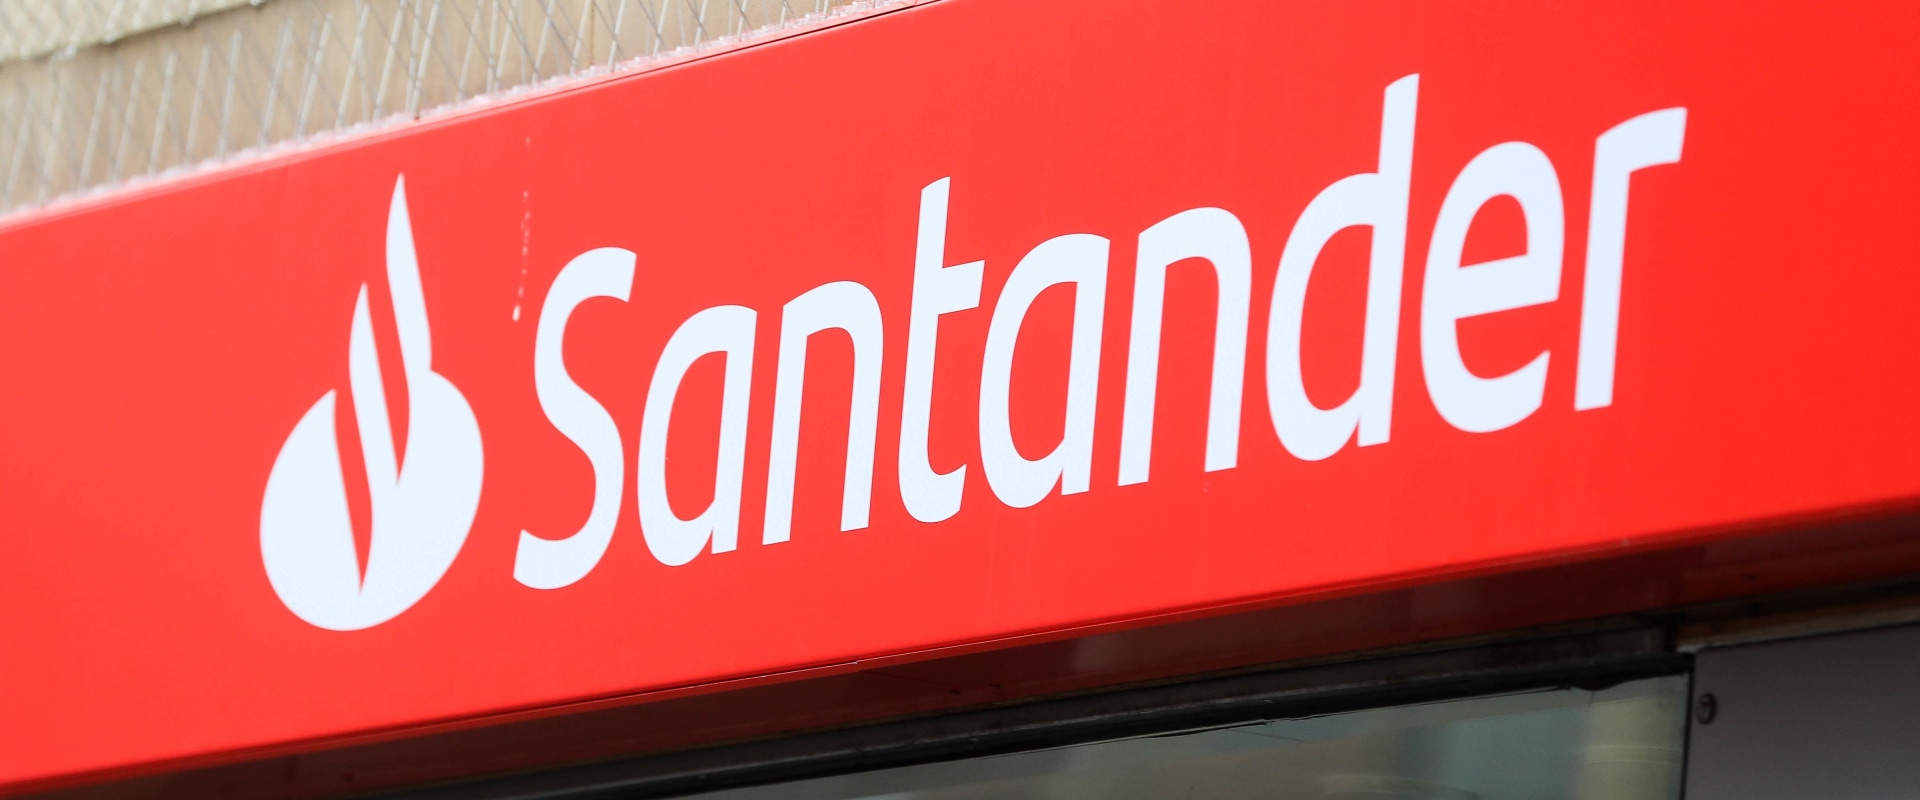 Santander 5 Year Fixed Rate Mortgage Deals